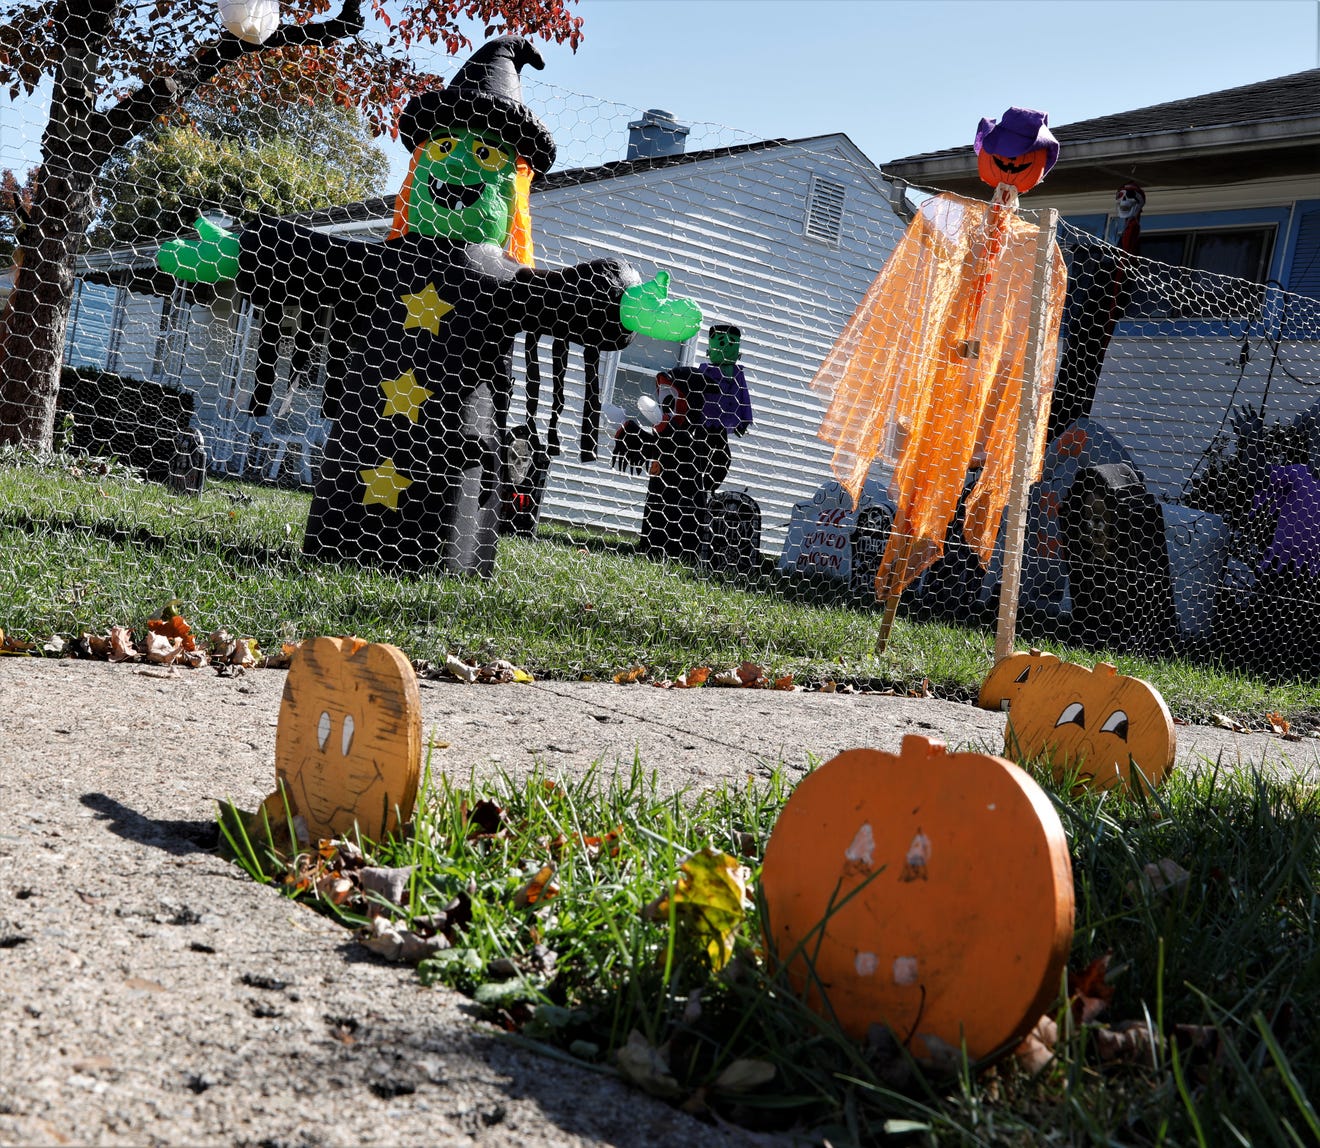 Lancaster gets into Halloween spirit with decorations, trickortreat